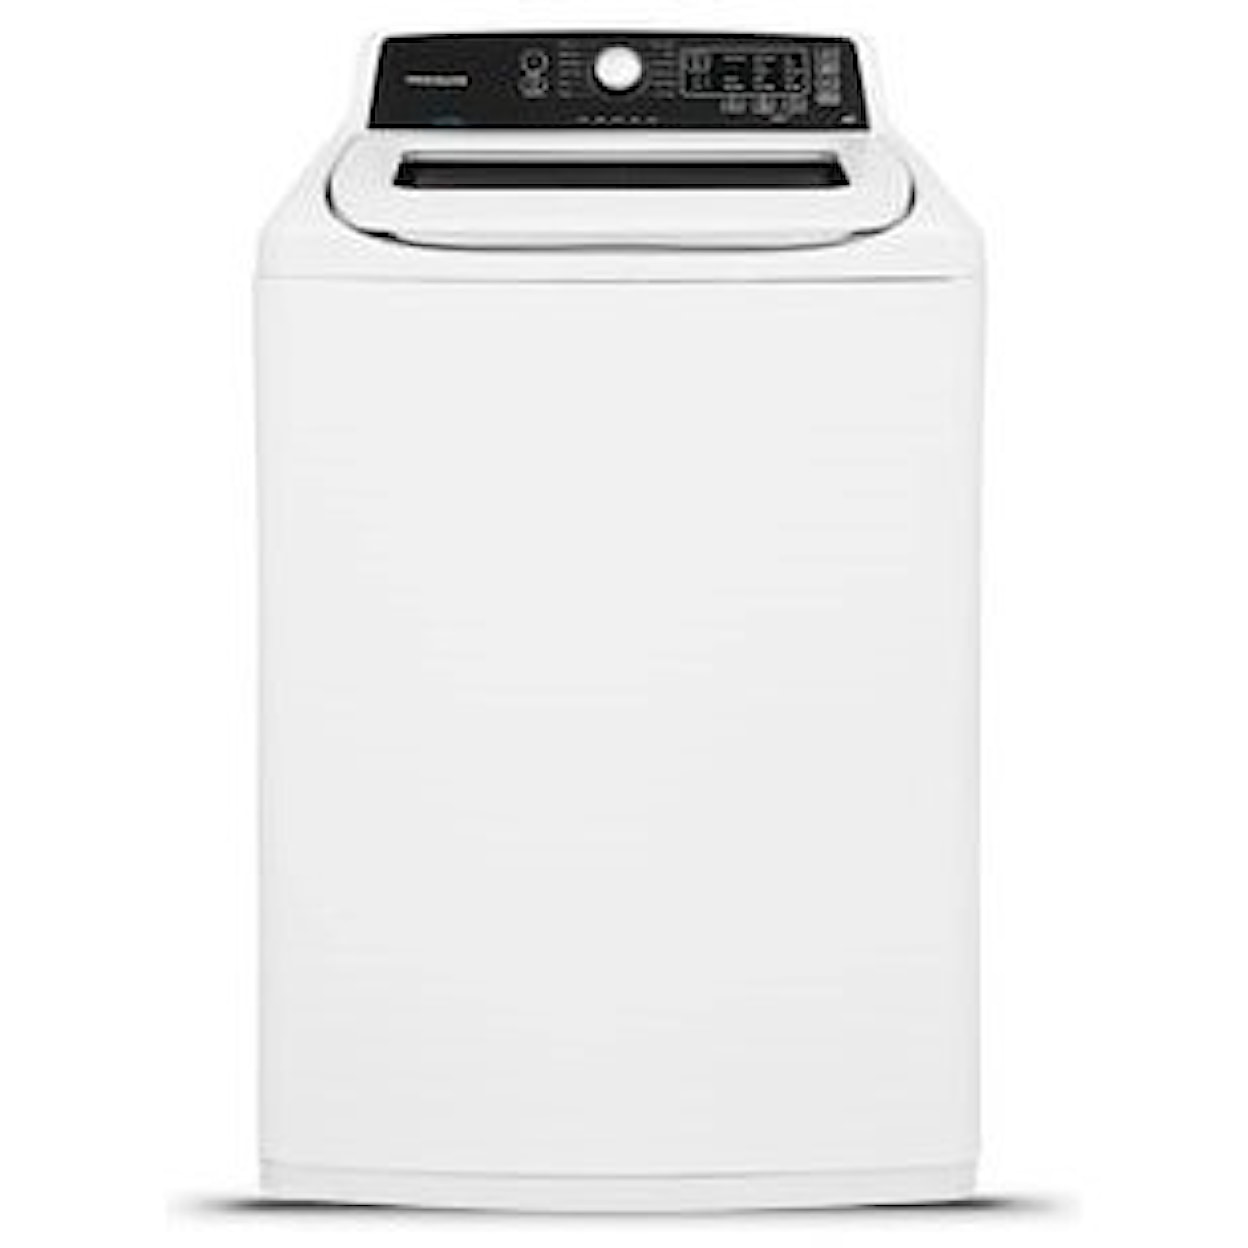 Frigidaire Washers 4.1 Cu. Ft. High Efficiency Top Load Washer